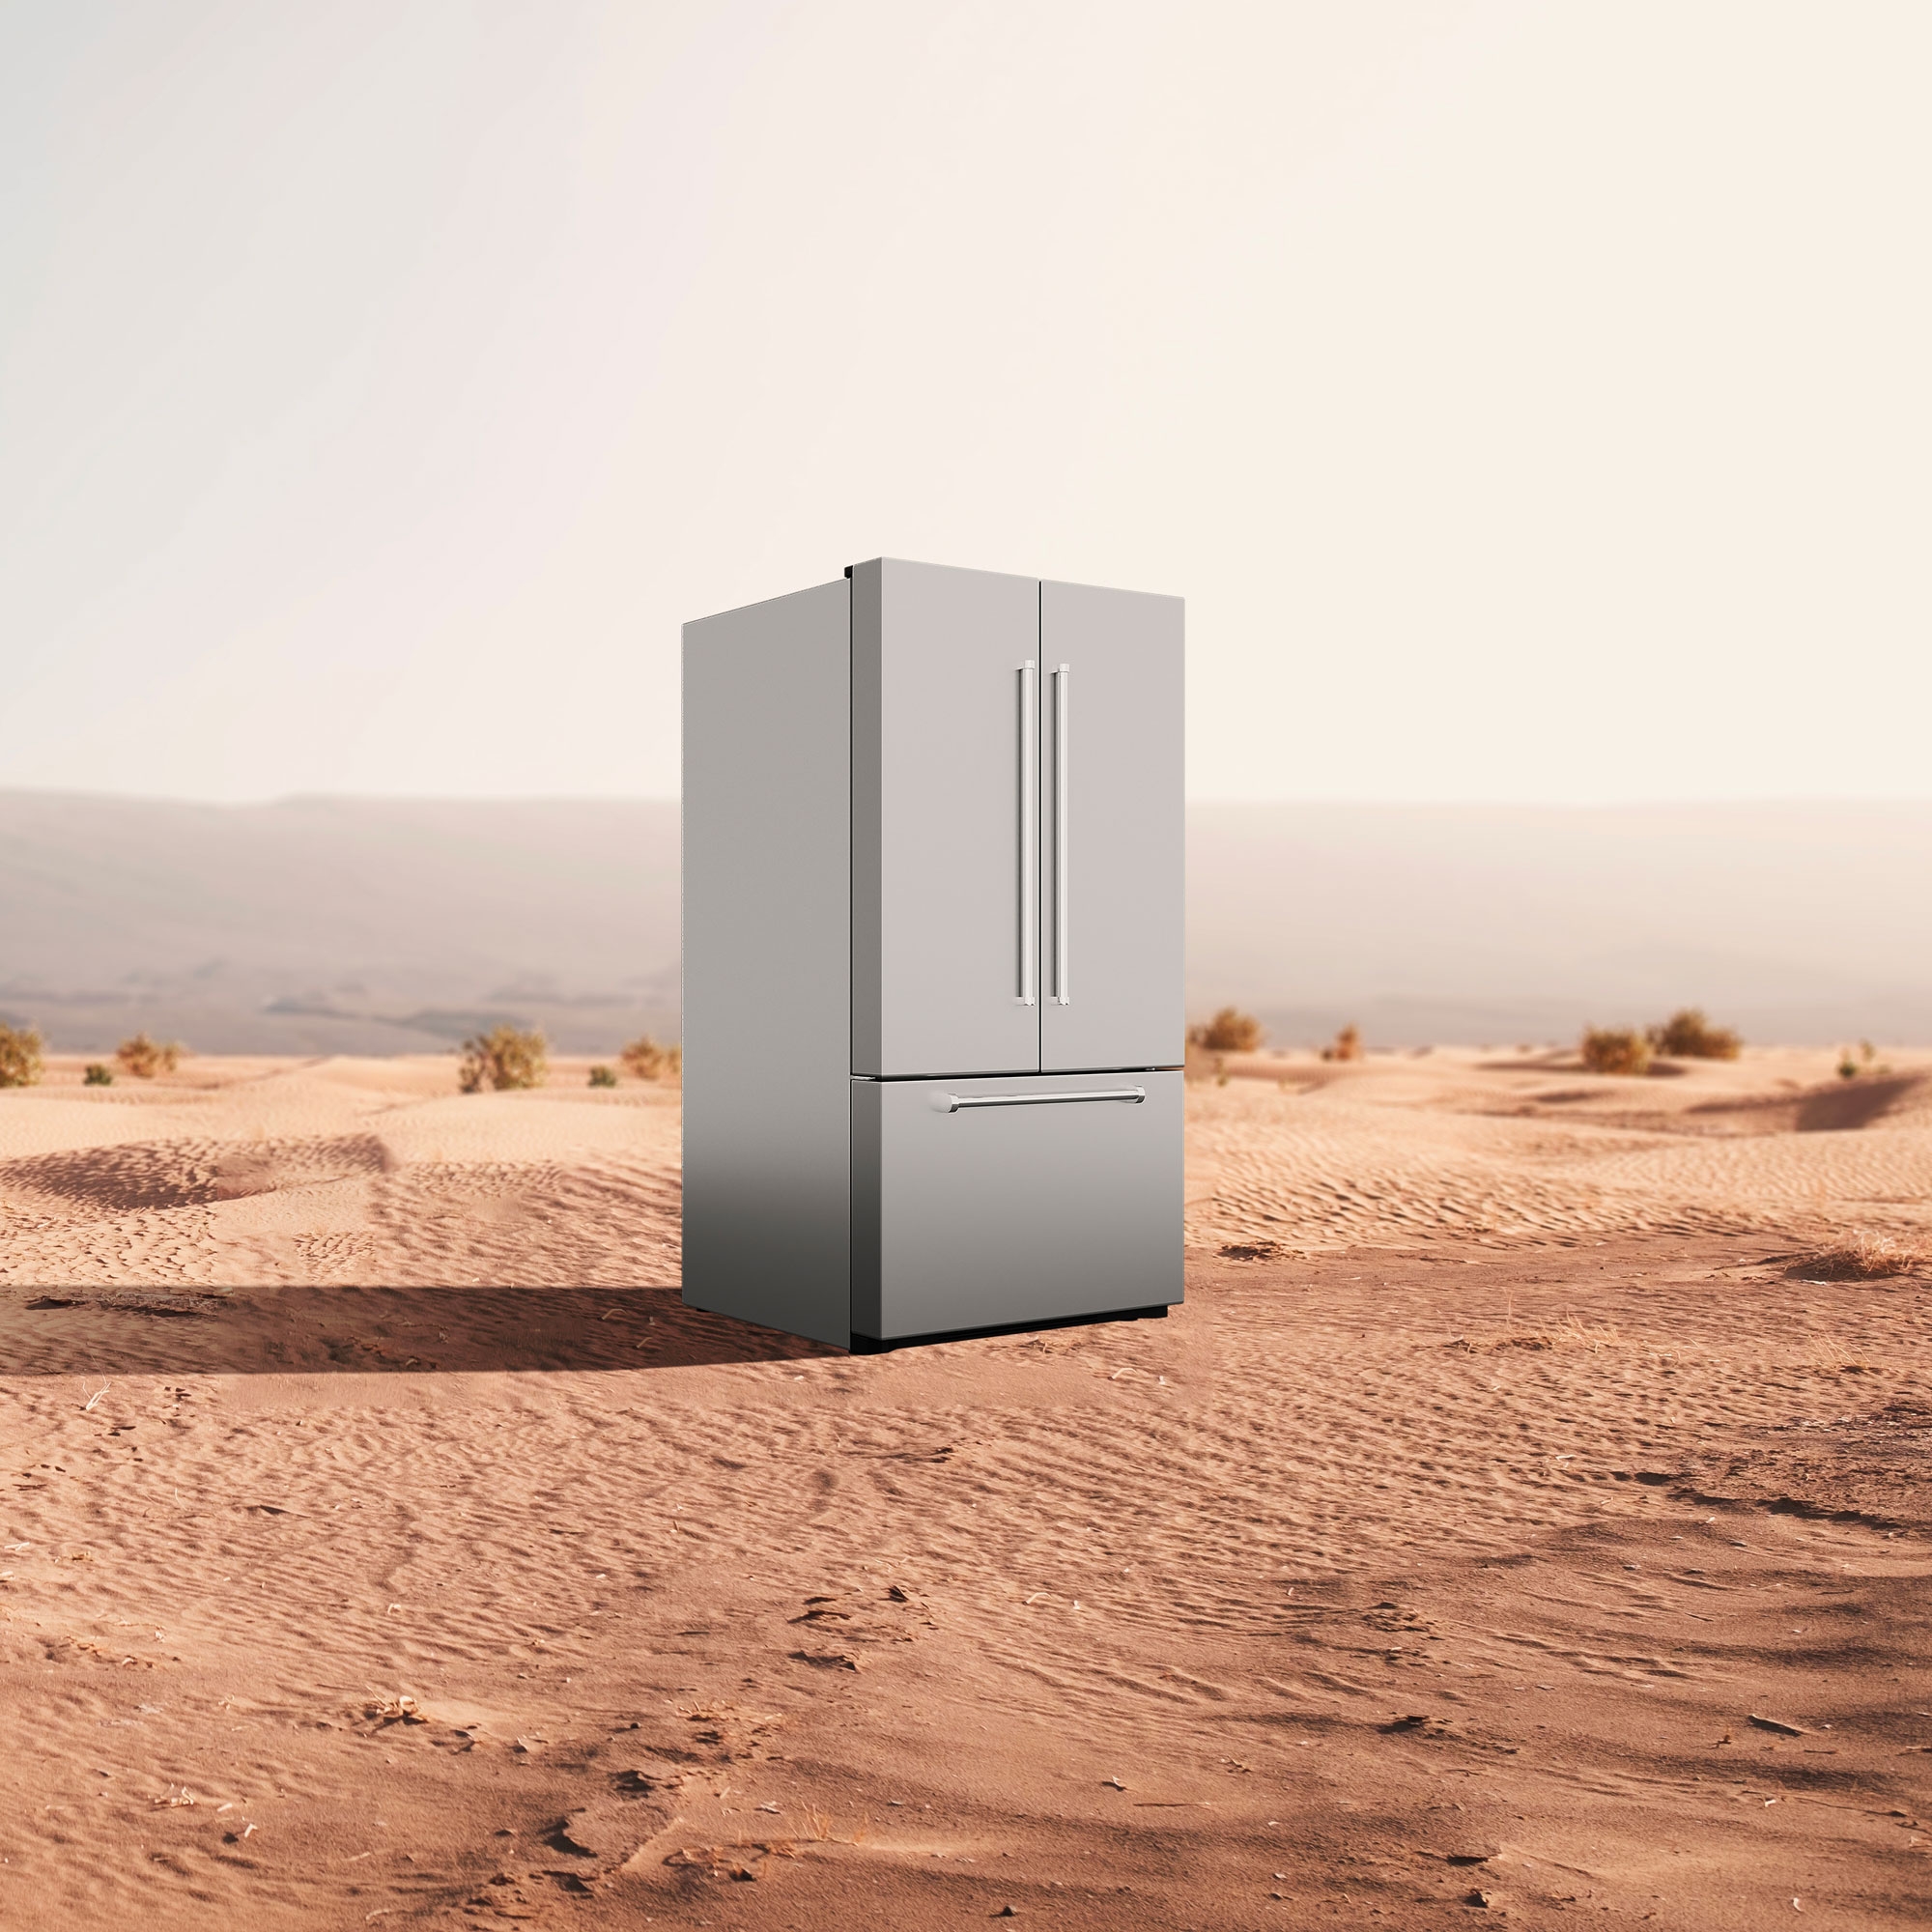 refrigerator-surrounded-by-nature-scene.jpg